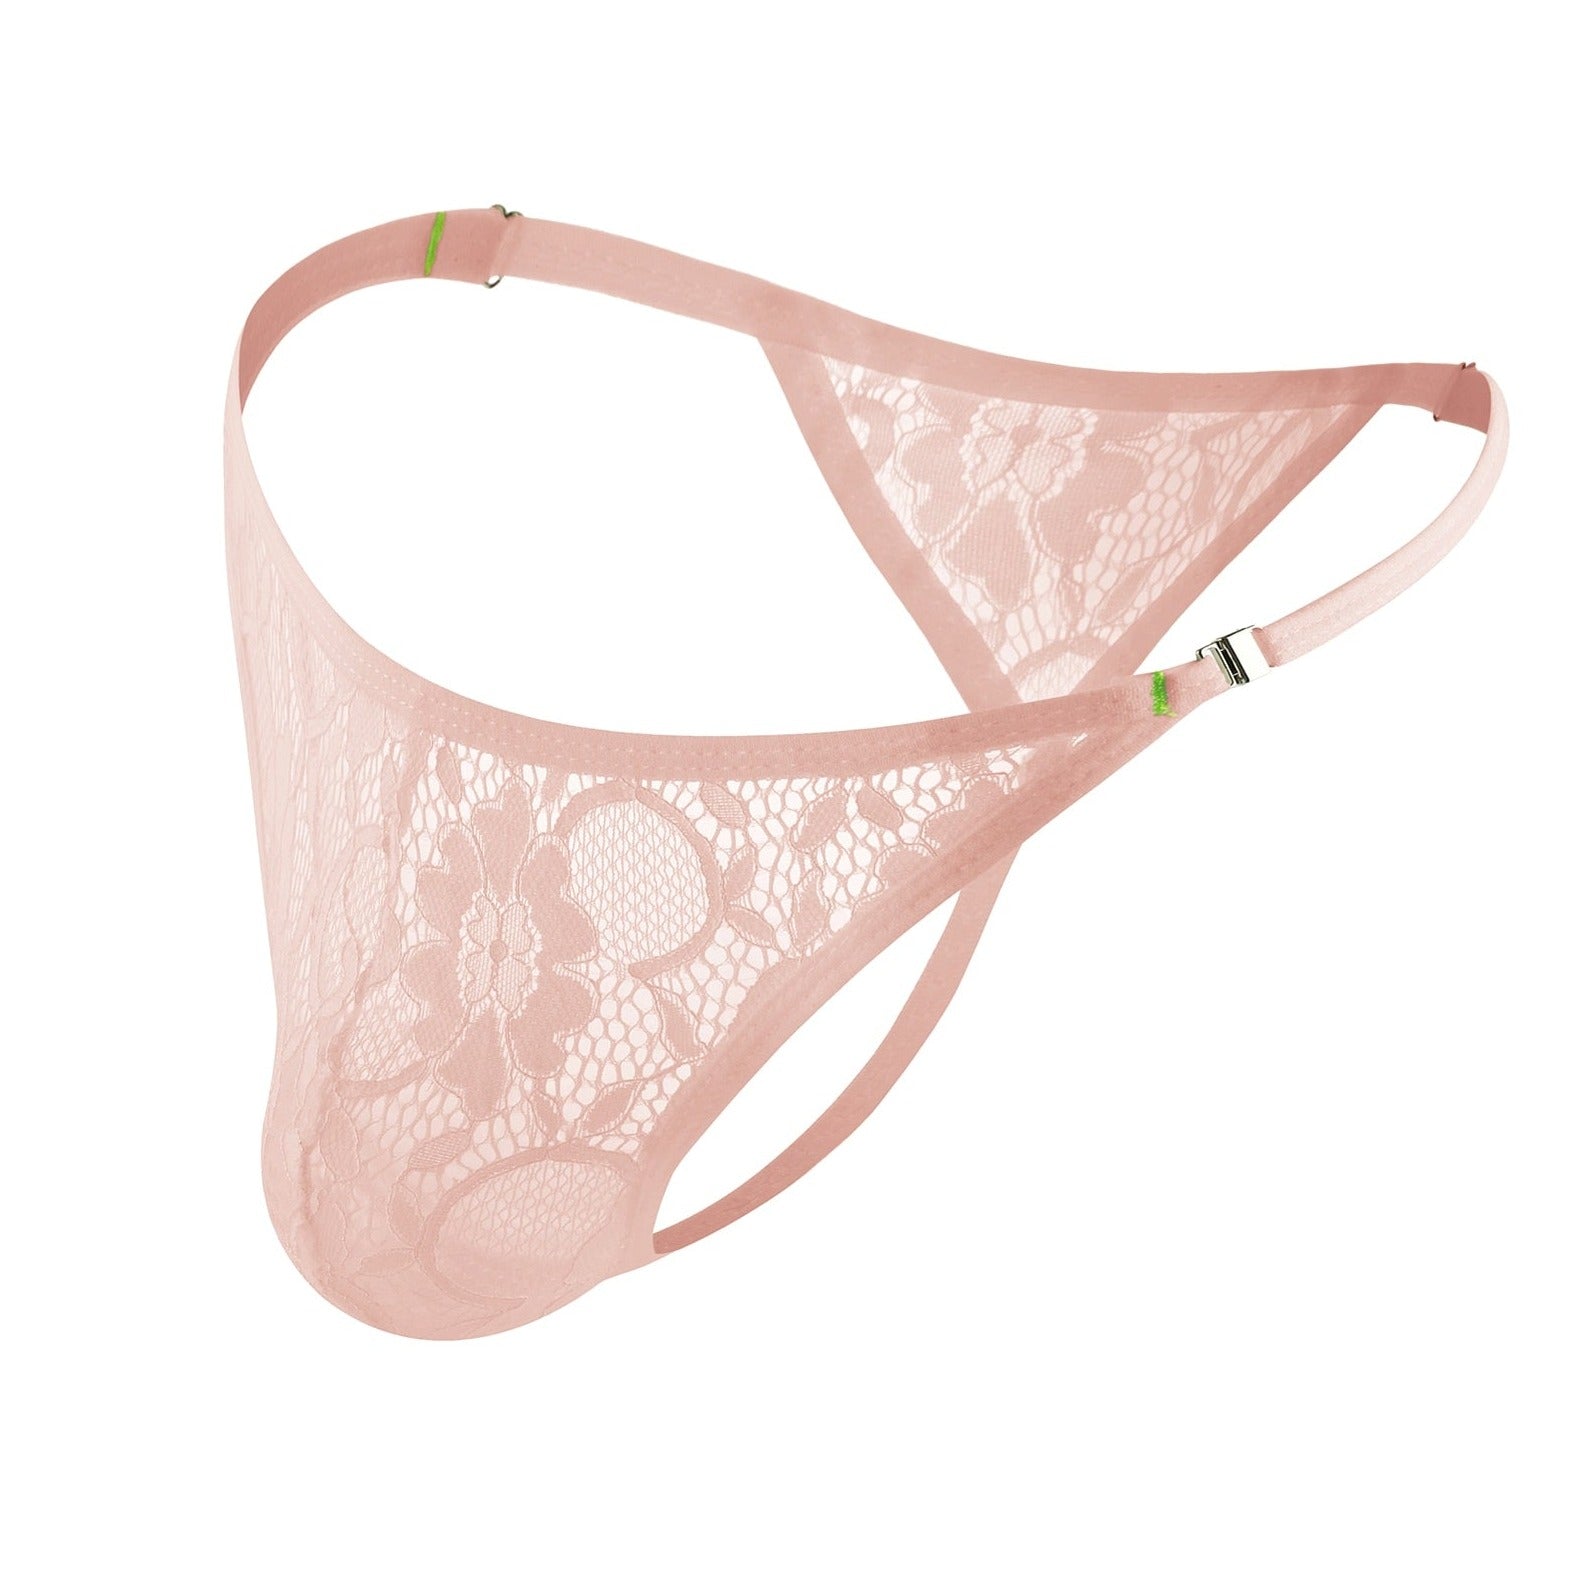 nude Erotic Lace Thong: Sexy Men's See-Through Underwear and Lingerie - pridevoyageshop.com - gay men’s underwear and swimwear